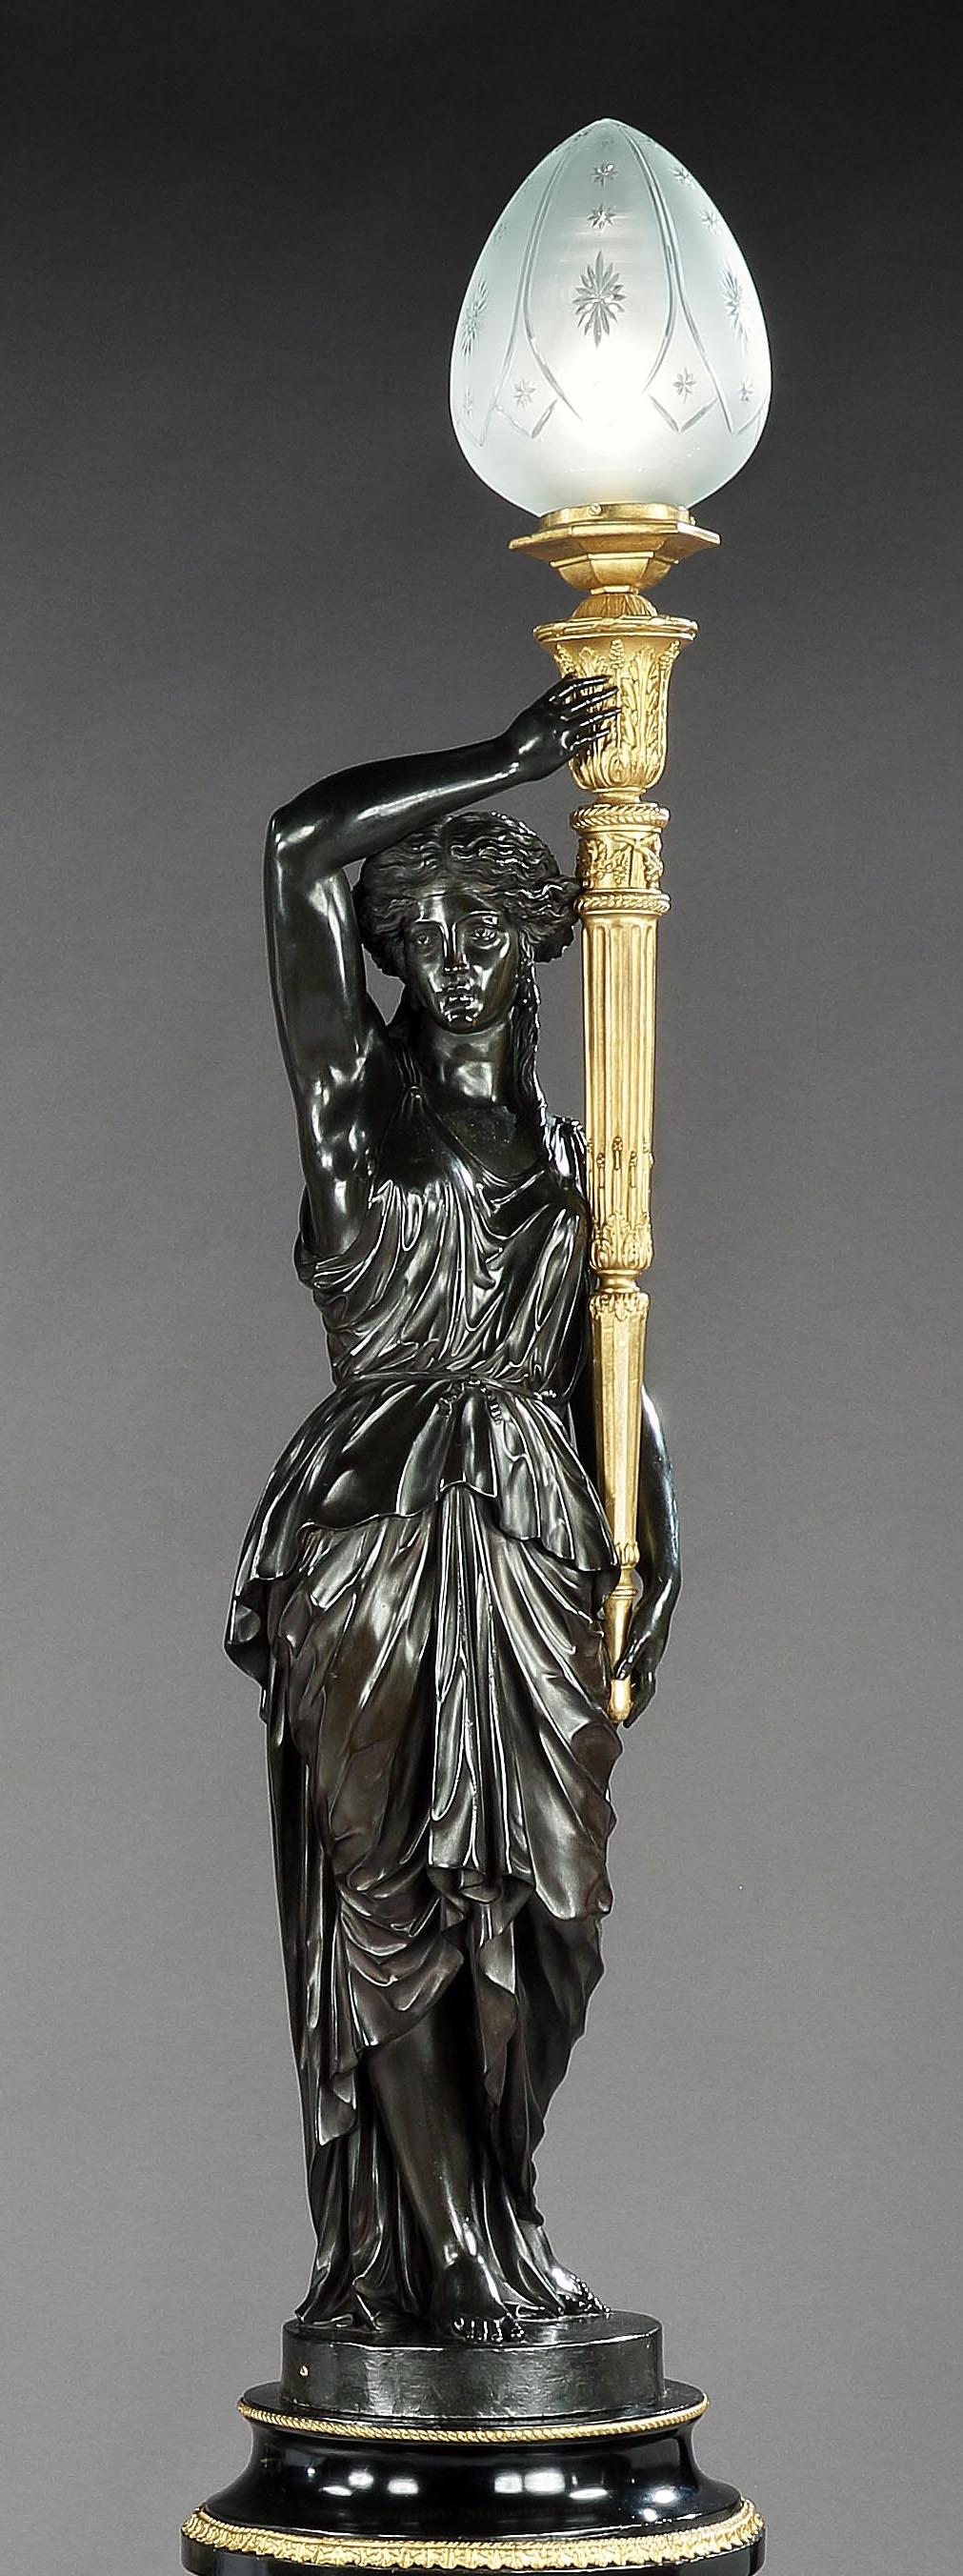 Neoclassical Revival Magnificent Pair of 19th Century Bronze Figural Torchères by Henry Dasson For Sale